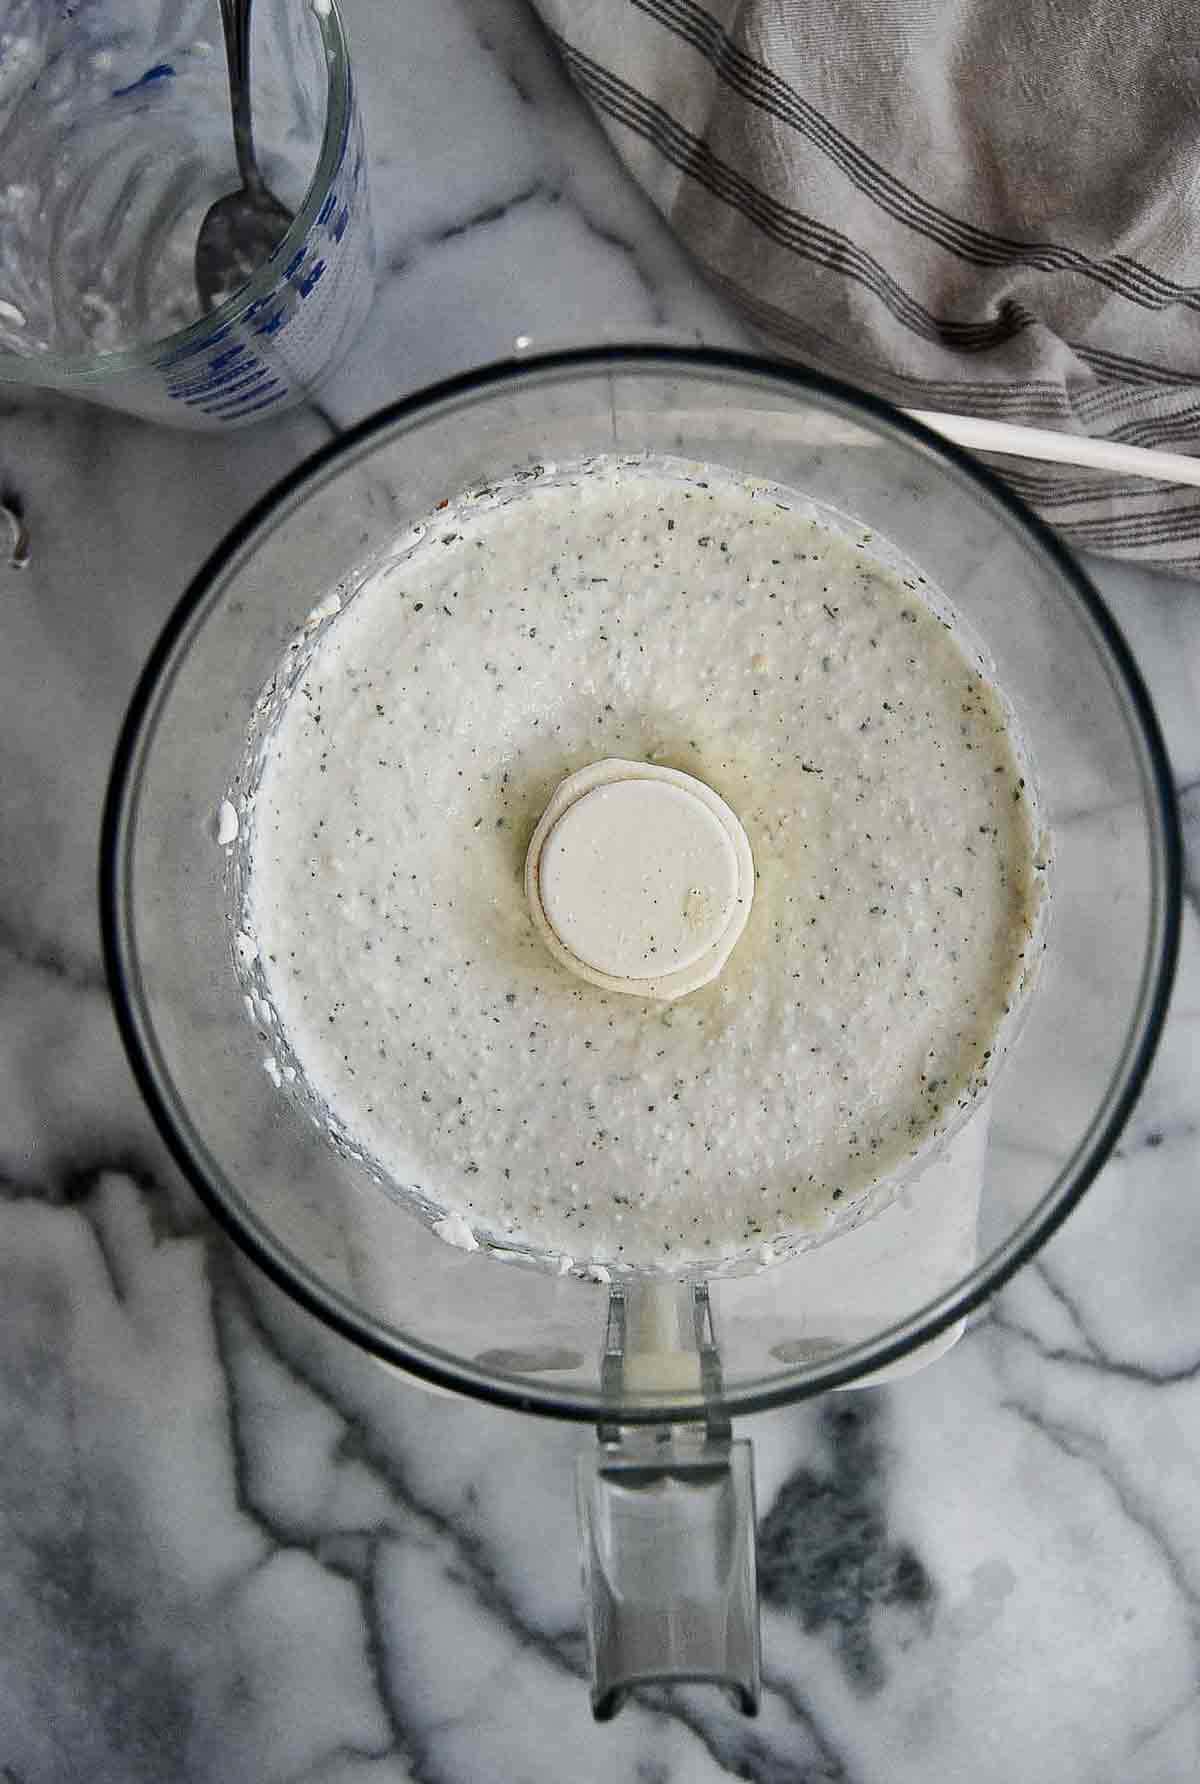 blended cottage cheese and ranch mixture.